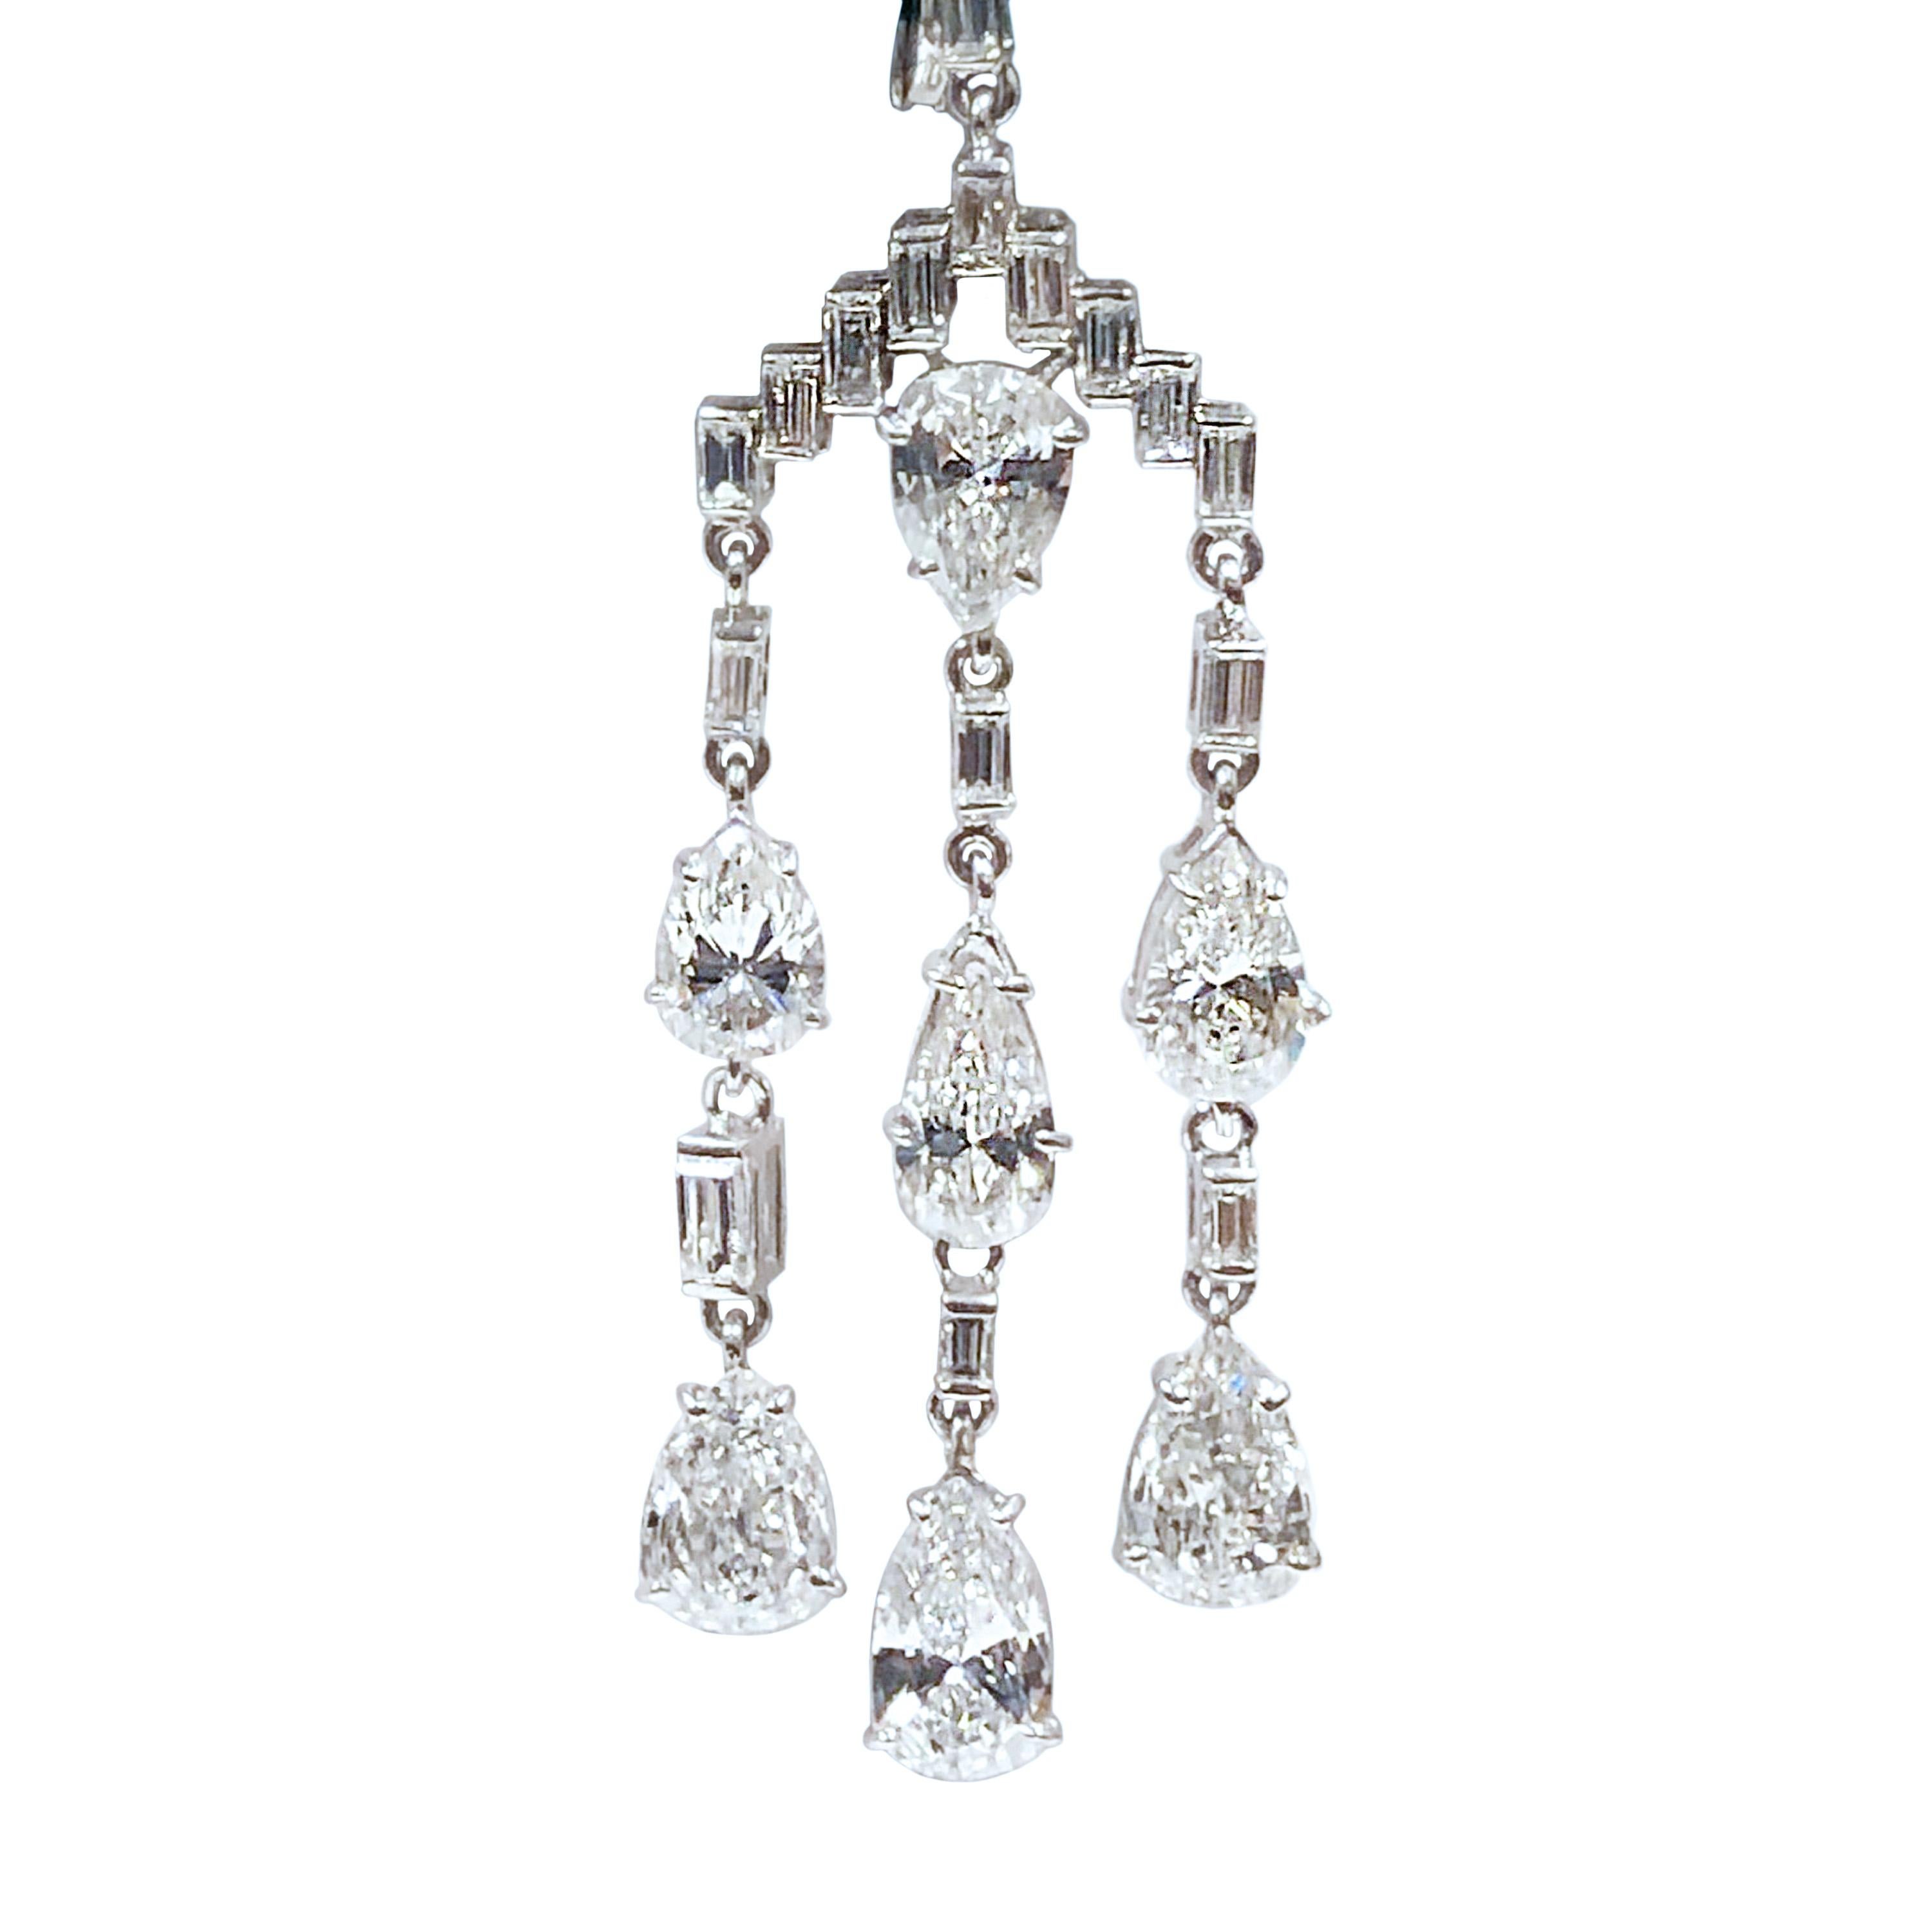 Phenomenal Platinum Earrings in a late Edwardian, Art Deco style, completely hand made and set with Pear shape and Baguette Diamonds totaling 9 to 9.50 Carats and grading as G in color and VS in Clarity. Measuring 2 inches in length and 5/8 inch